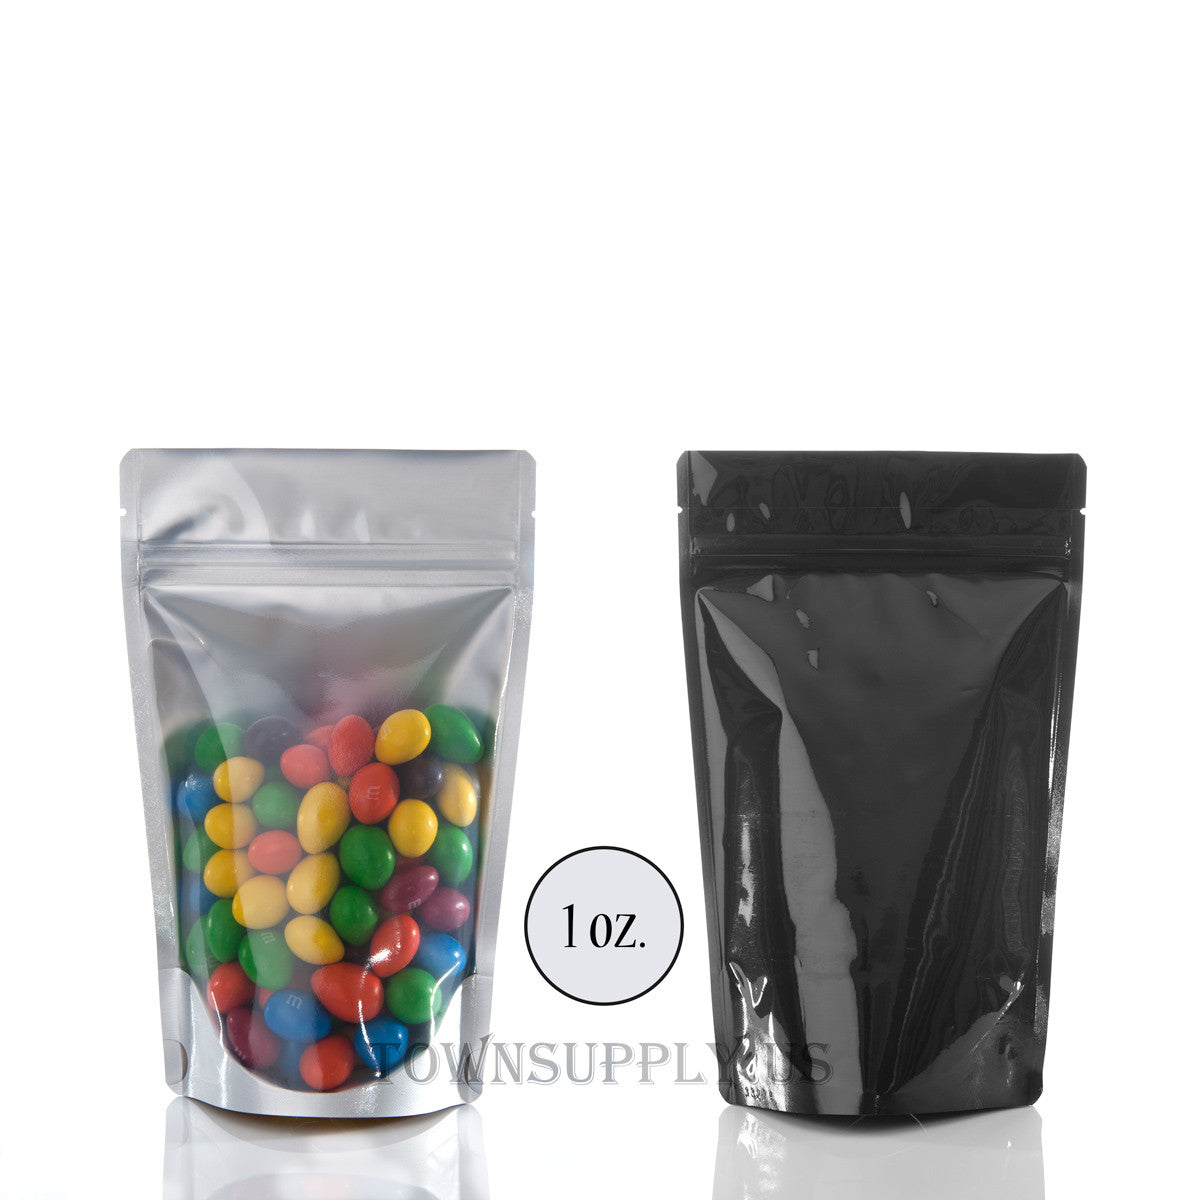 black foil stand up pouch with clear poly front, 1 oz. bags - Town Supply